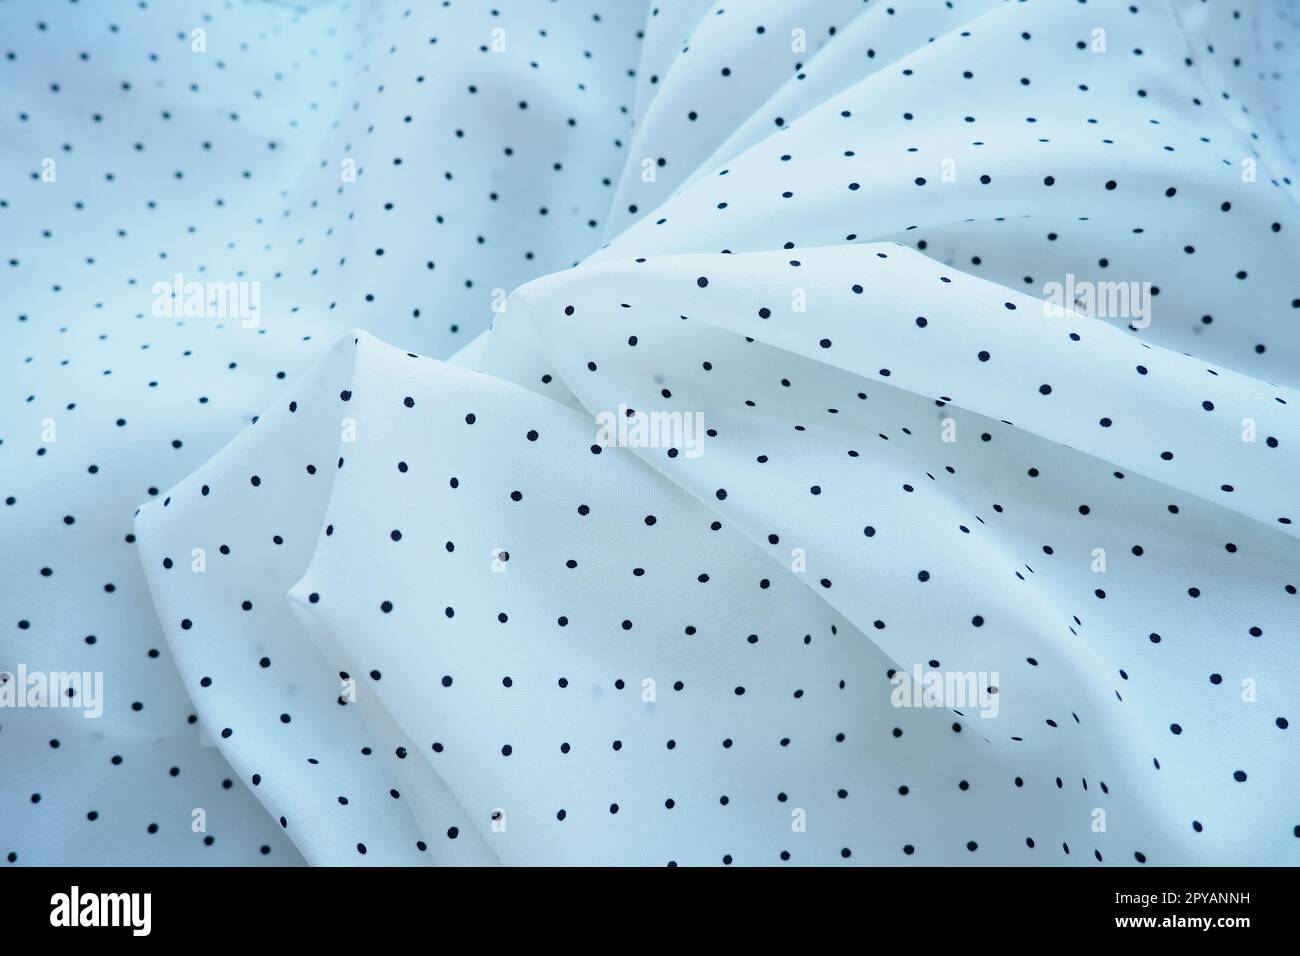 Texture of silk fabric. Black polka dots on a white background. Dress lightweight synthetic fabric in white with a repeating pattern. The textile is made up of waves and folds. Feminine classic style. Stock Photo